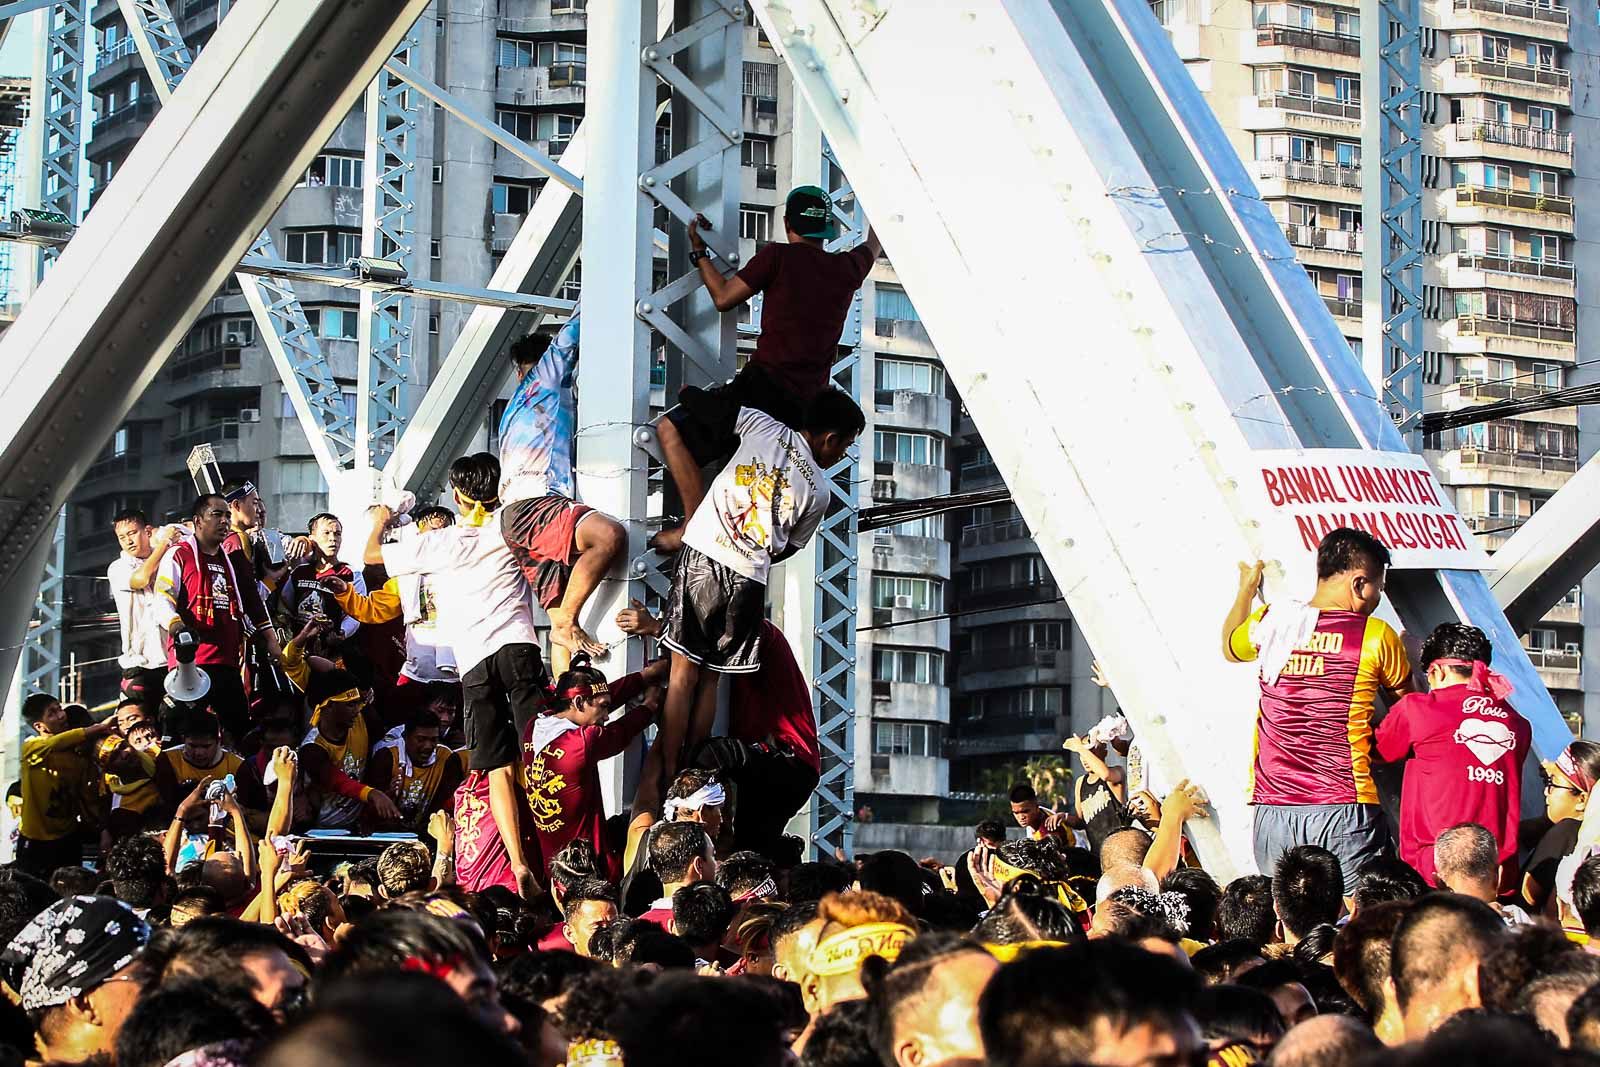 Devotees climb into the Ayala bridge to get a glimpse of the image of the Black Nazarene during the Traslacion on January 9, 2020. Photo by Ben Nabong/Rappler 